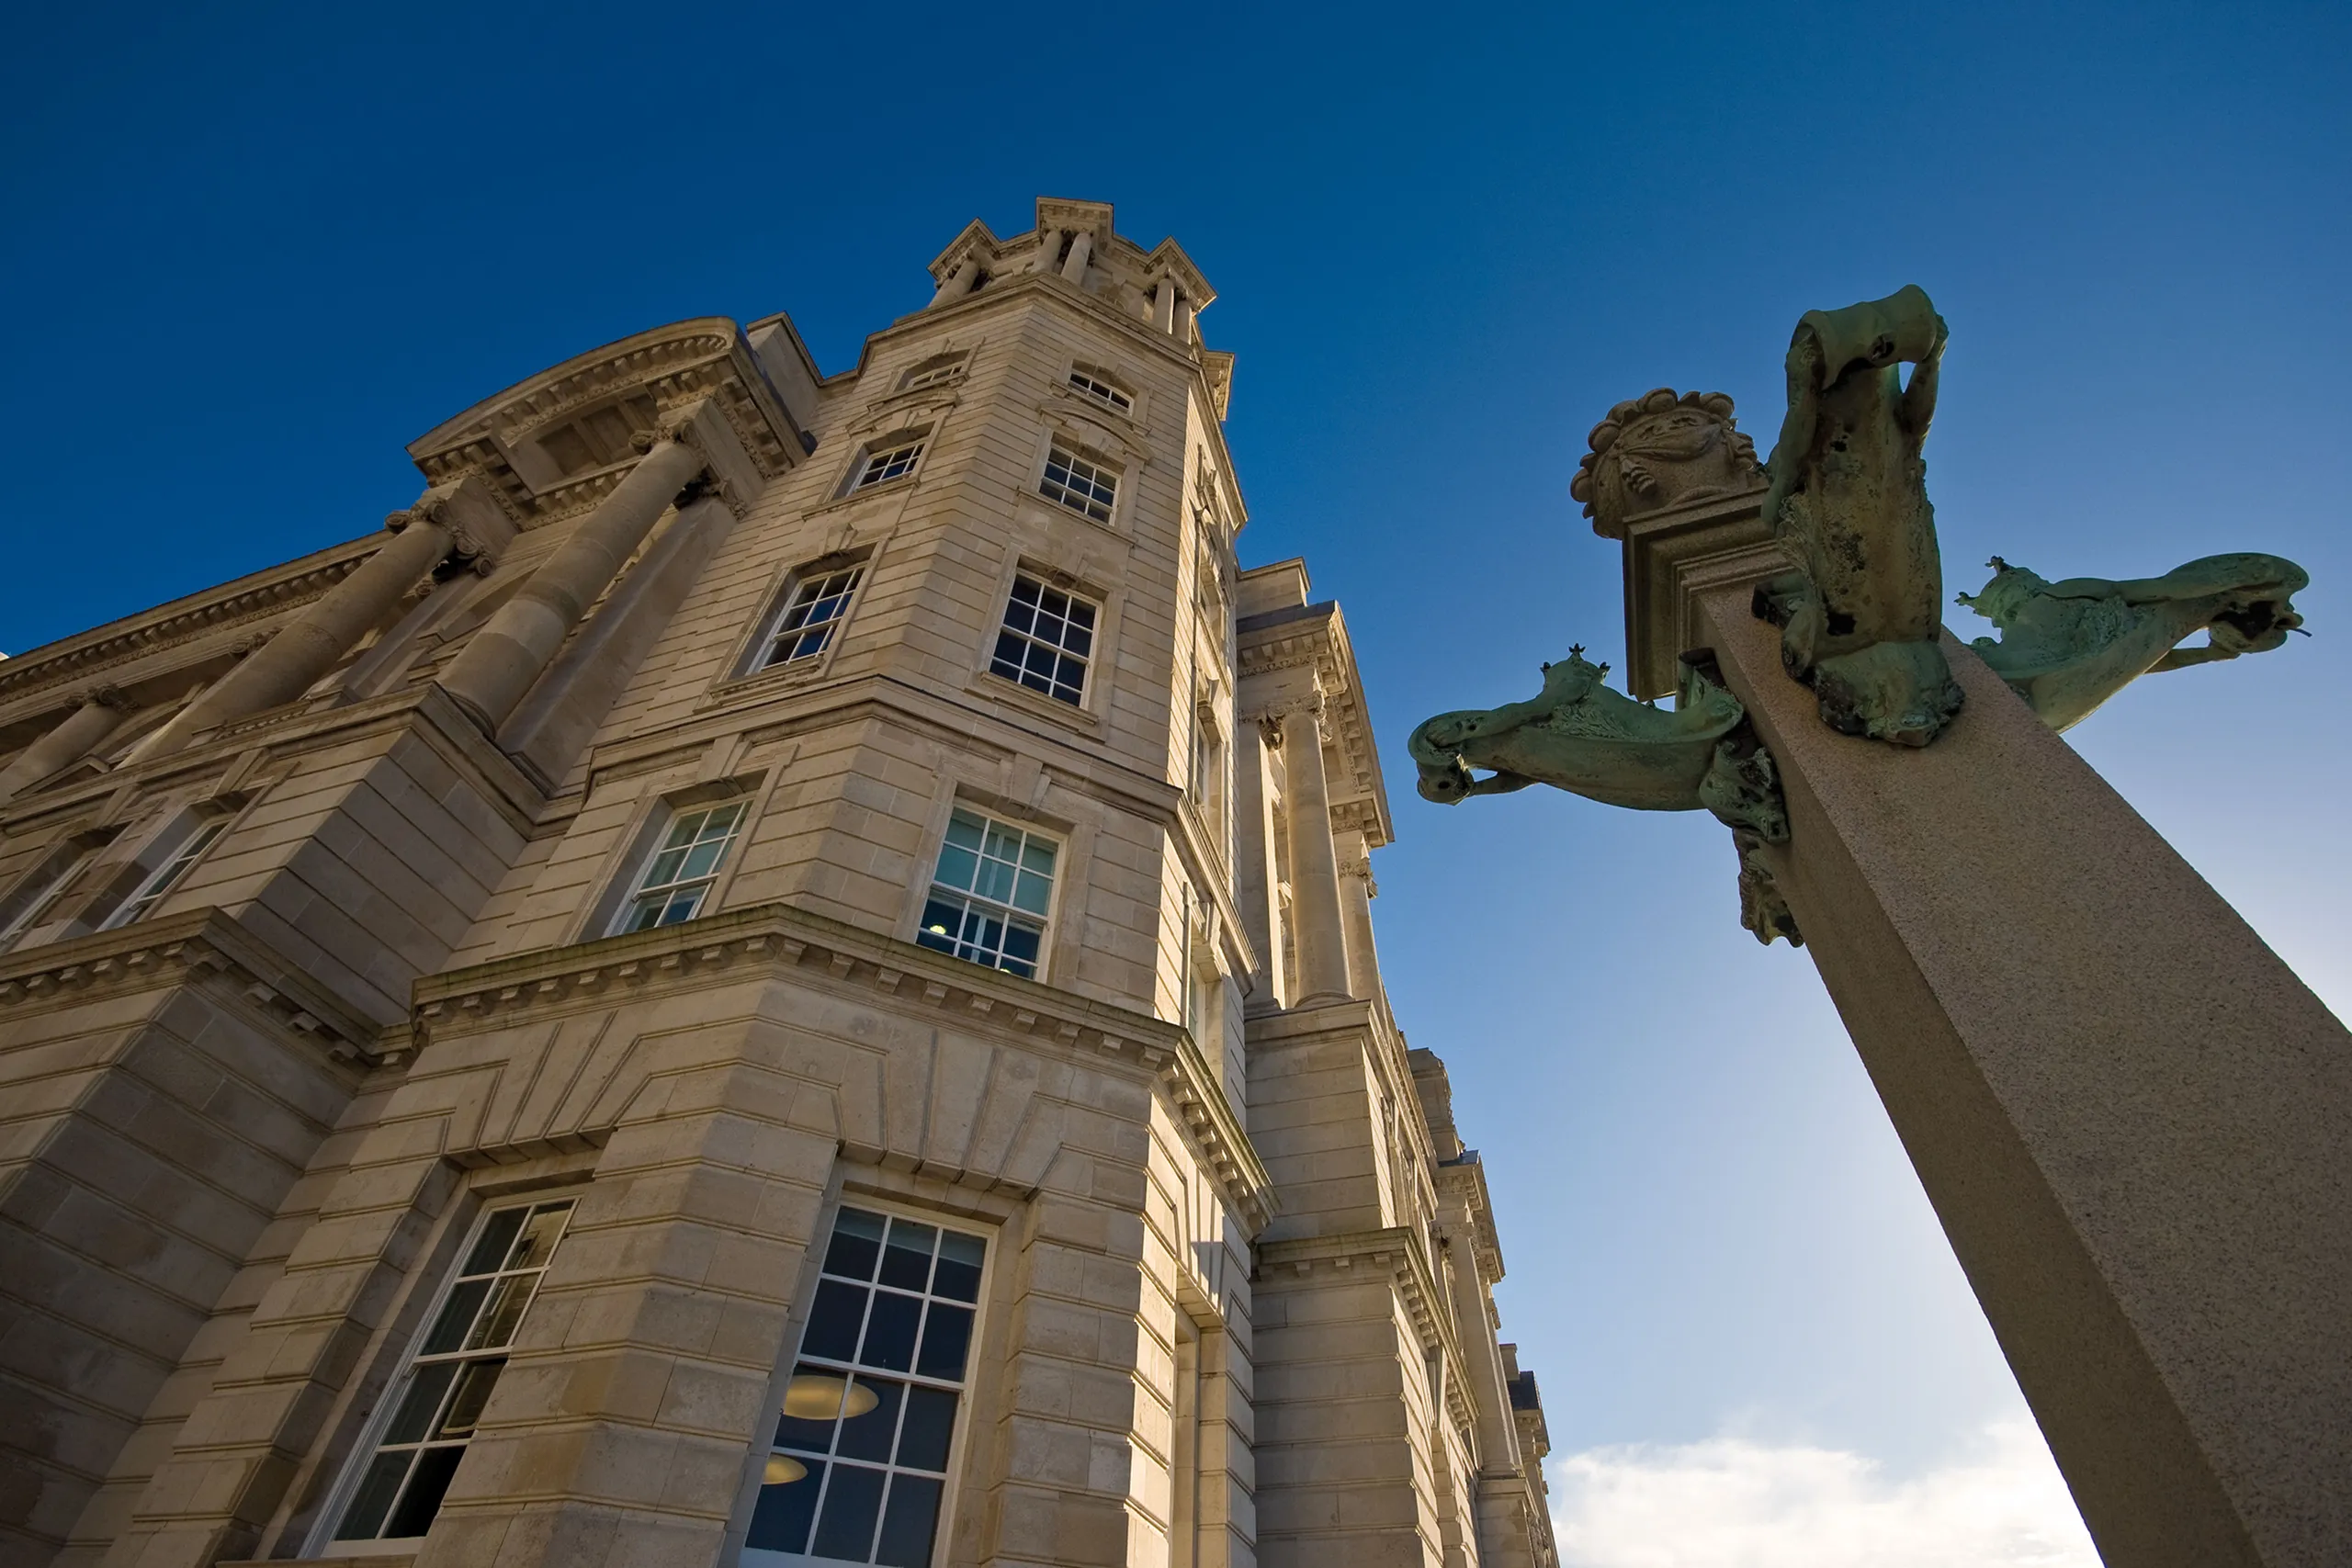 The Port of Liverpool Building, external